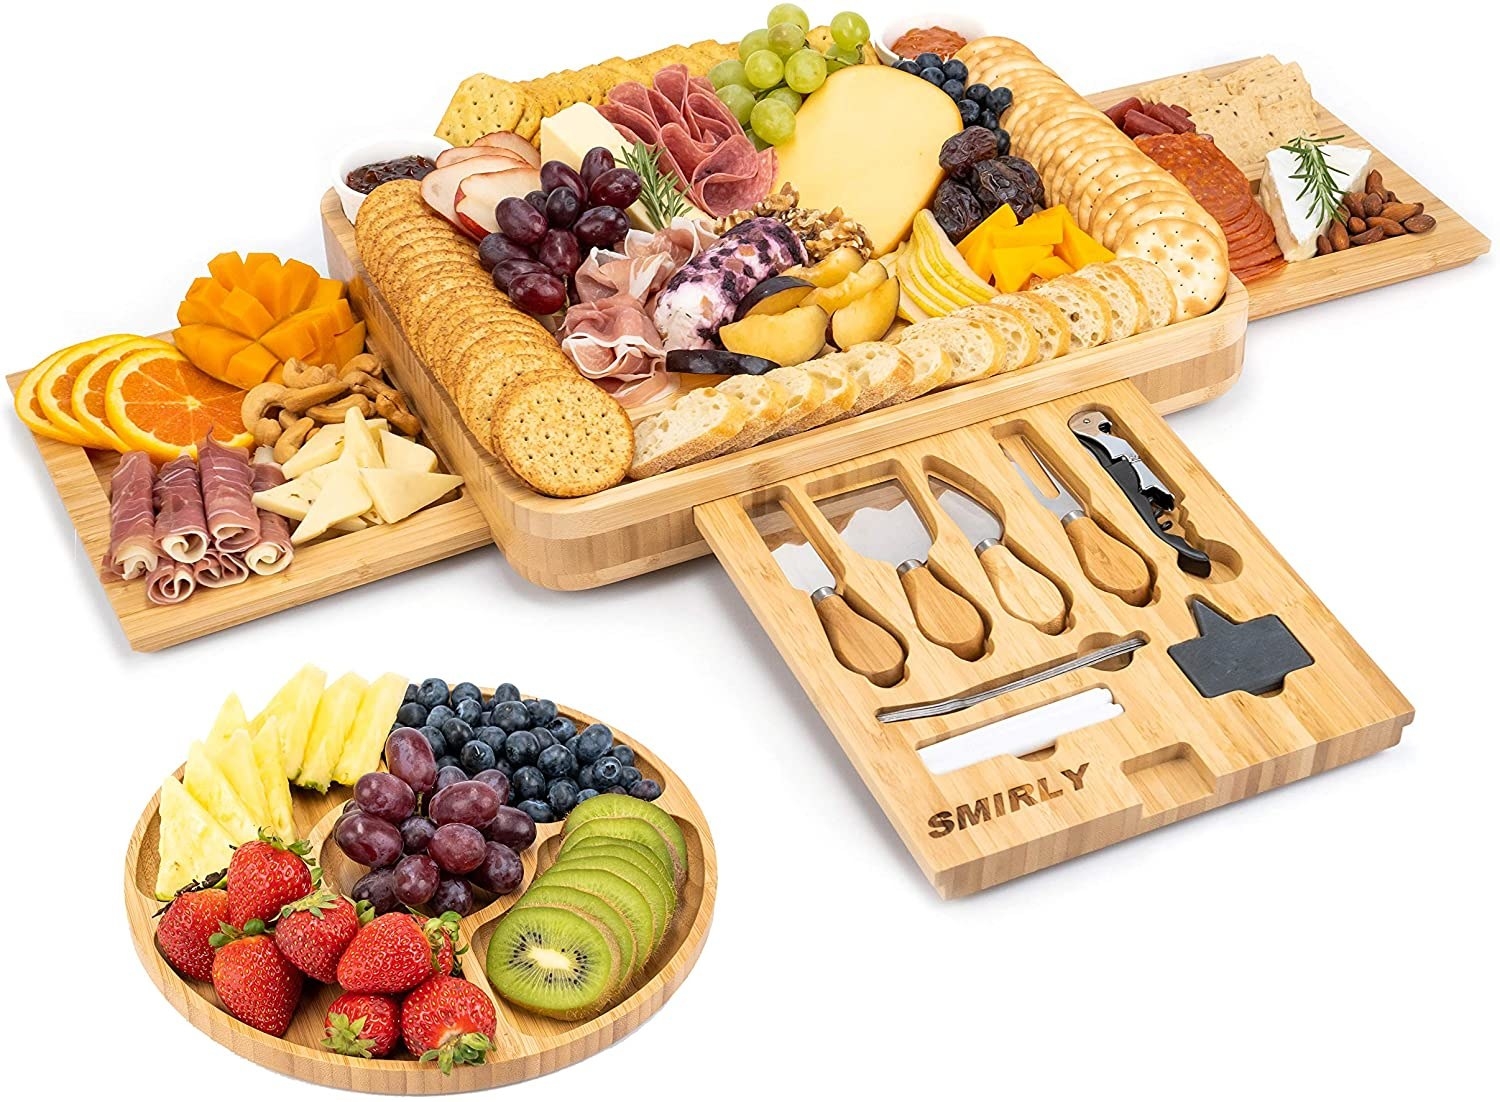 Bamboo charcuterie and cutlery set